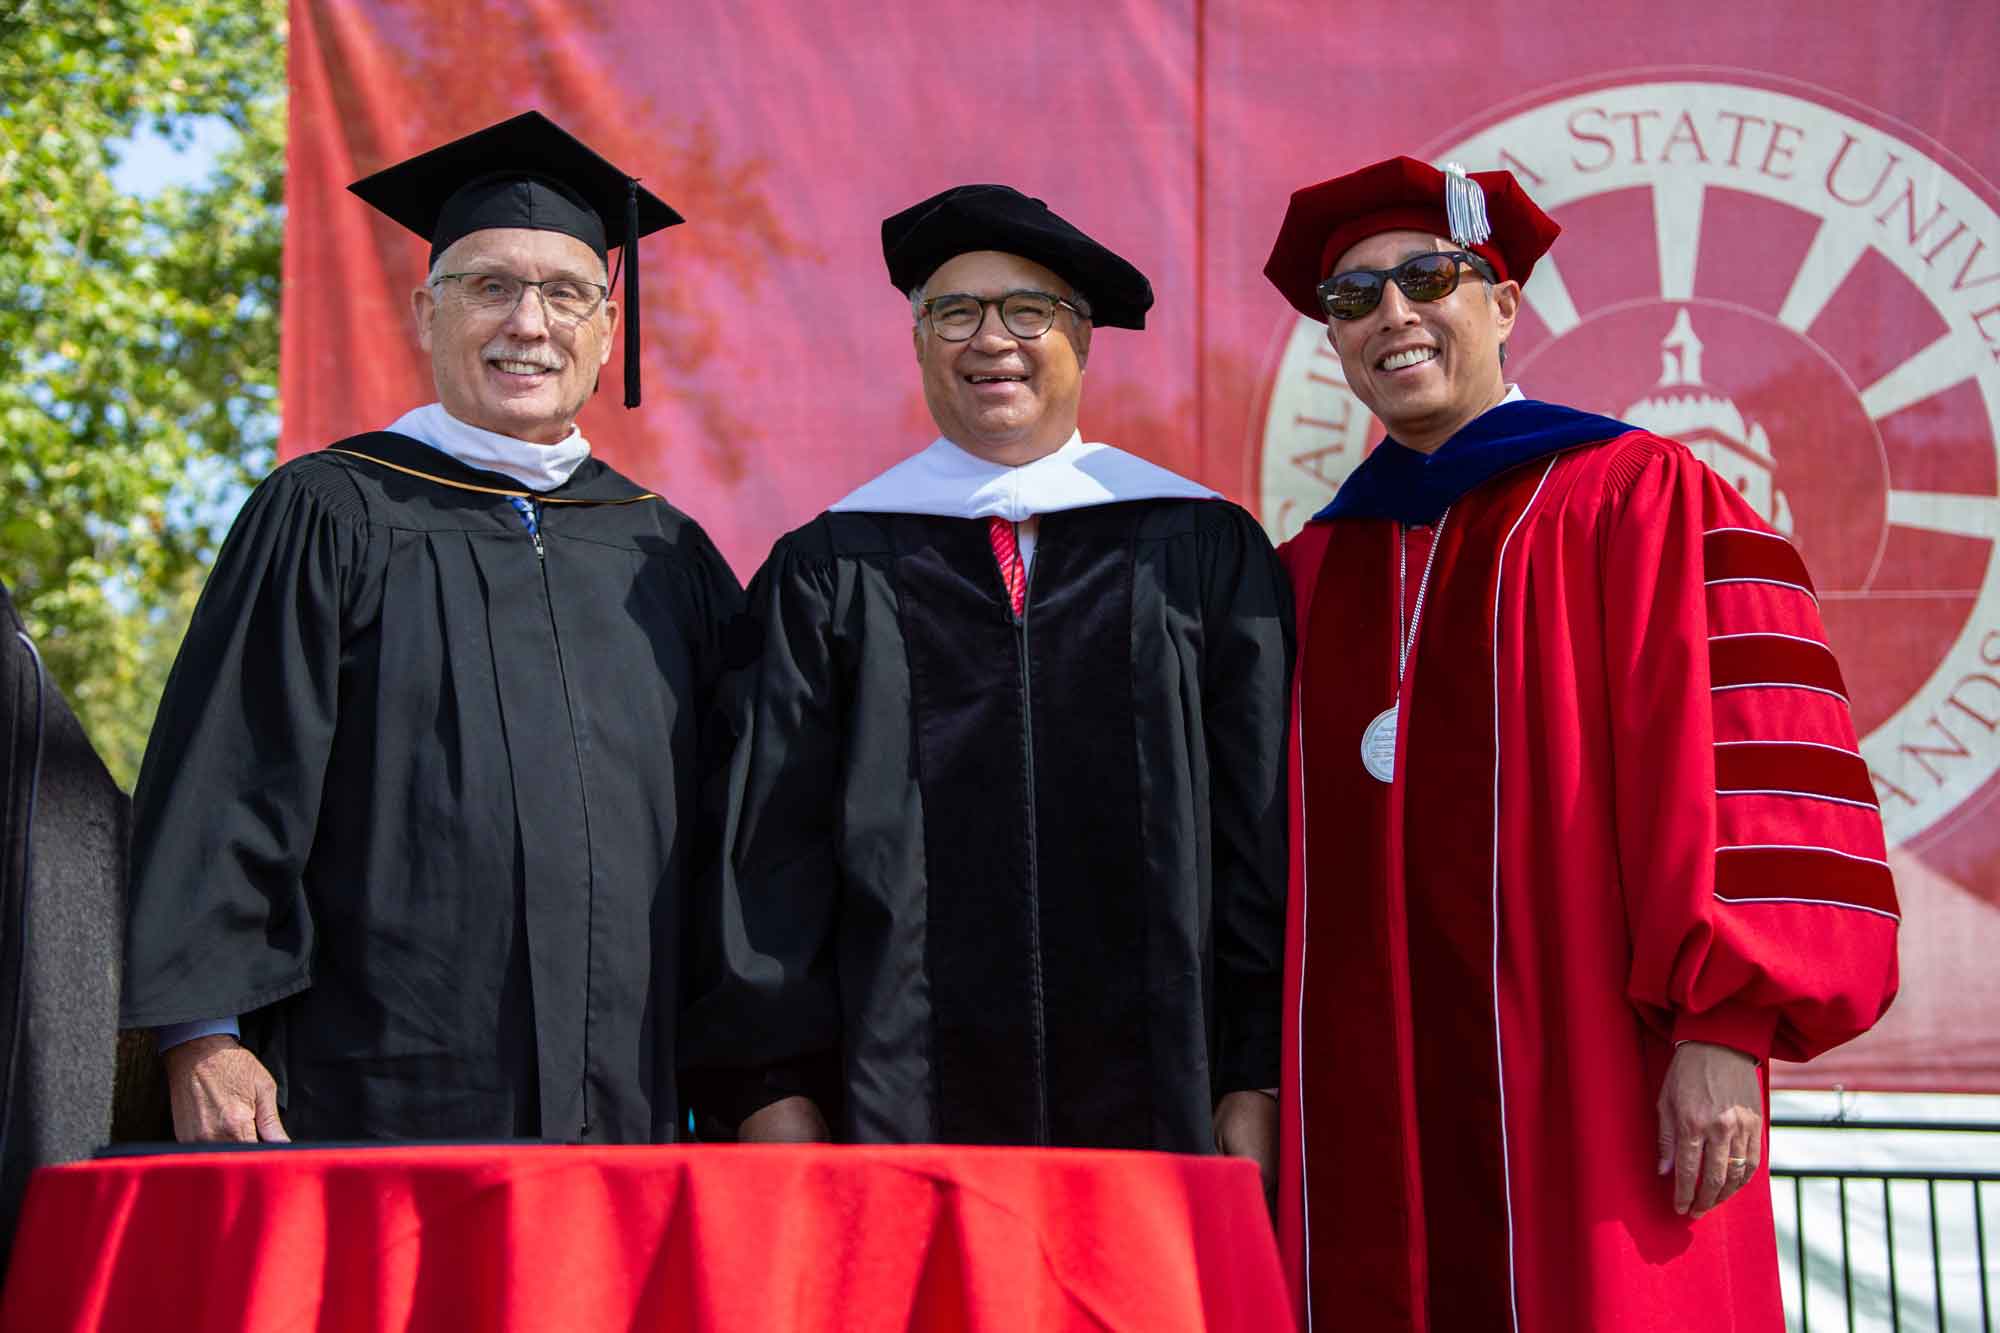 CSU Alumni Trustee Larry Adamson, Peter  Taylor, and President Yao at the May 23 ceremony.